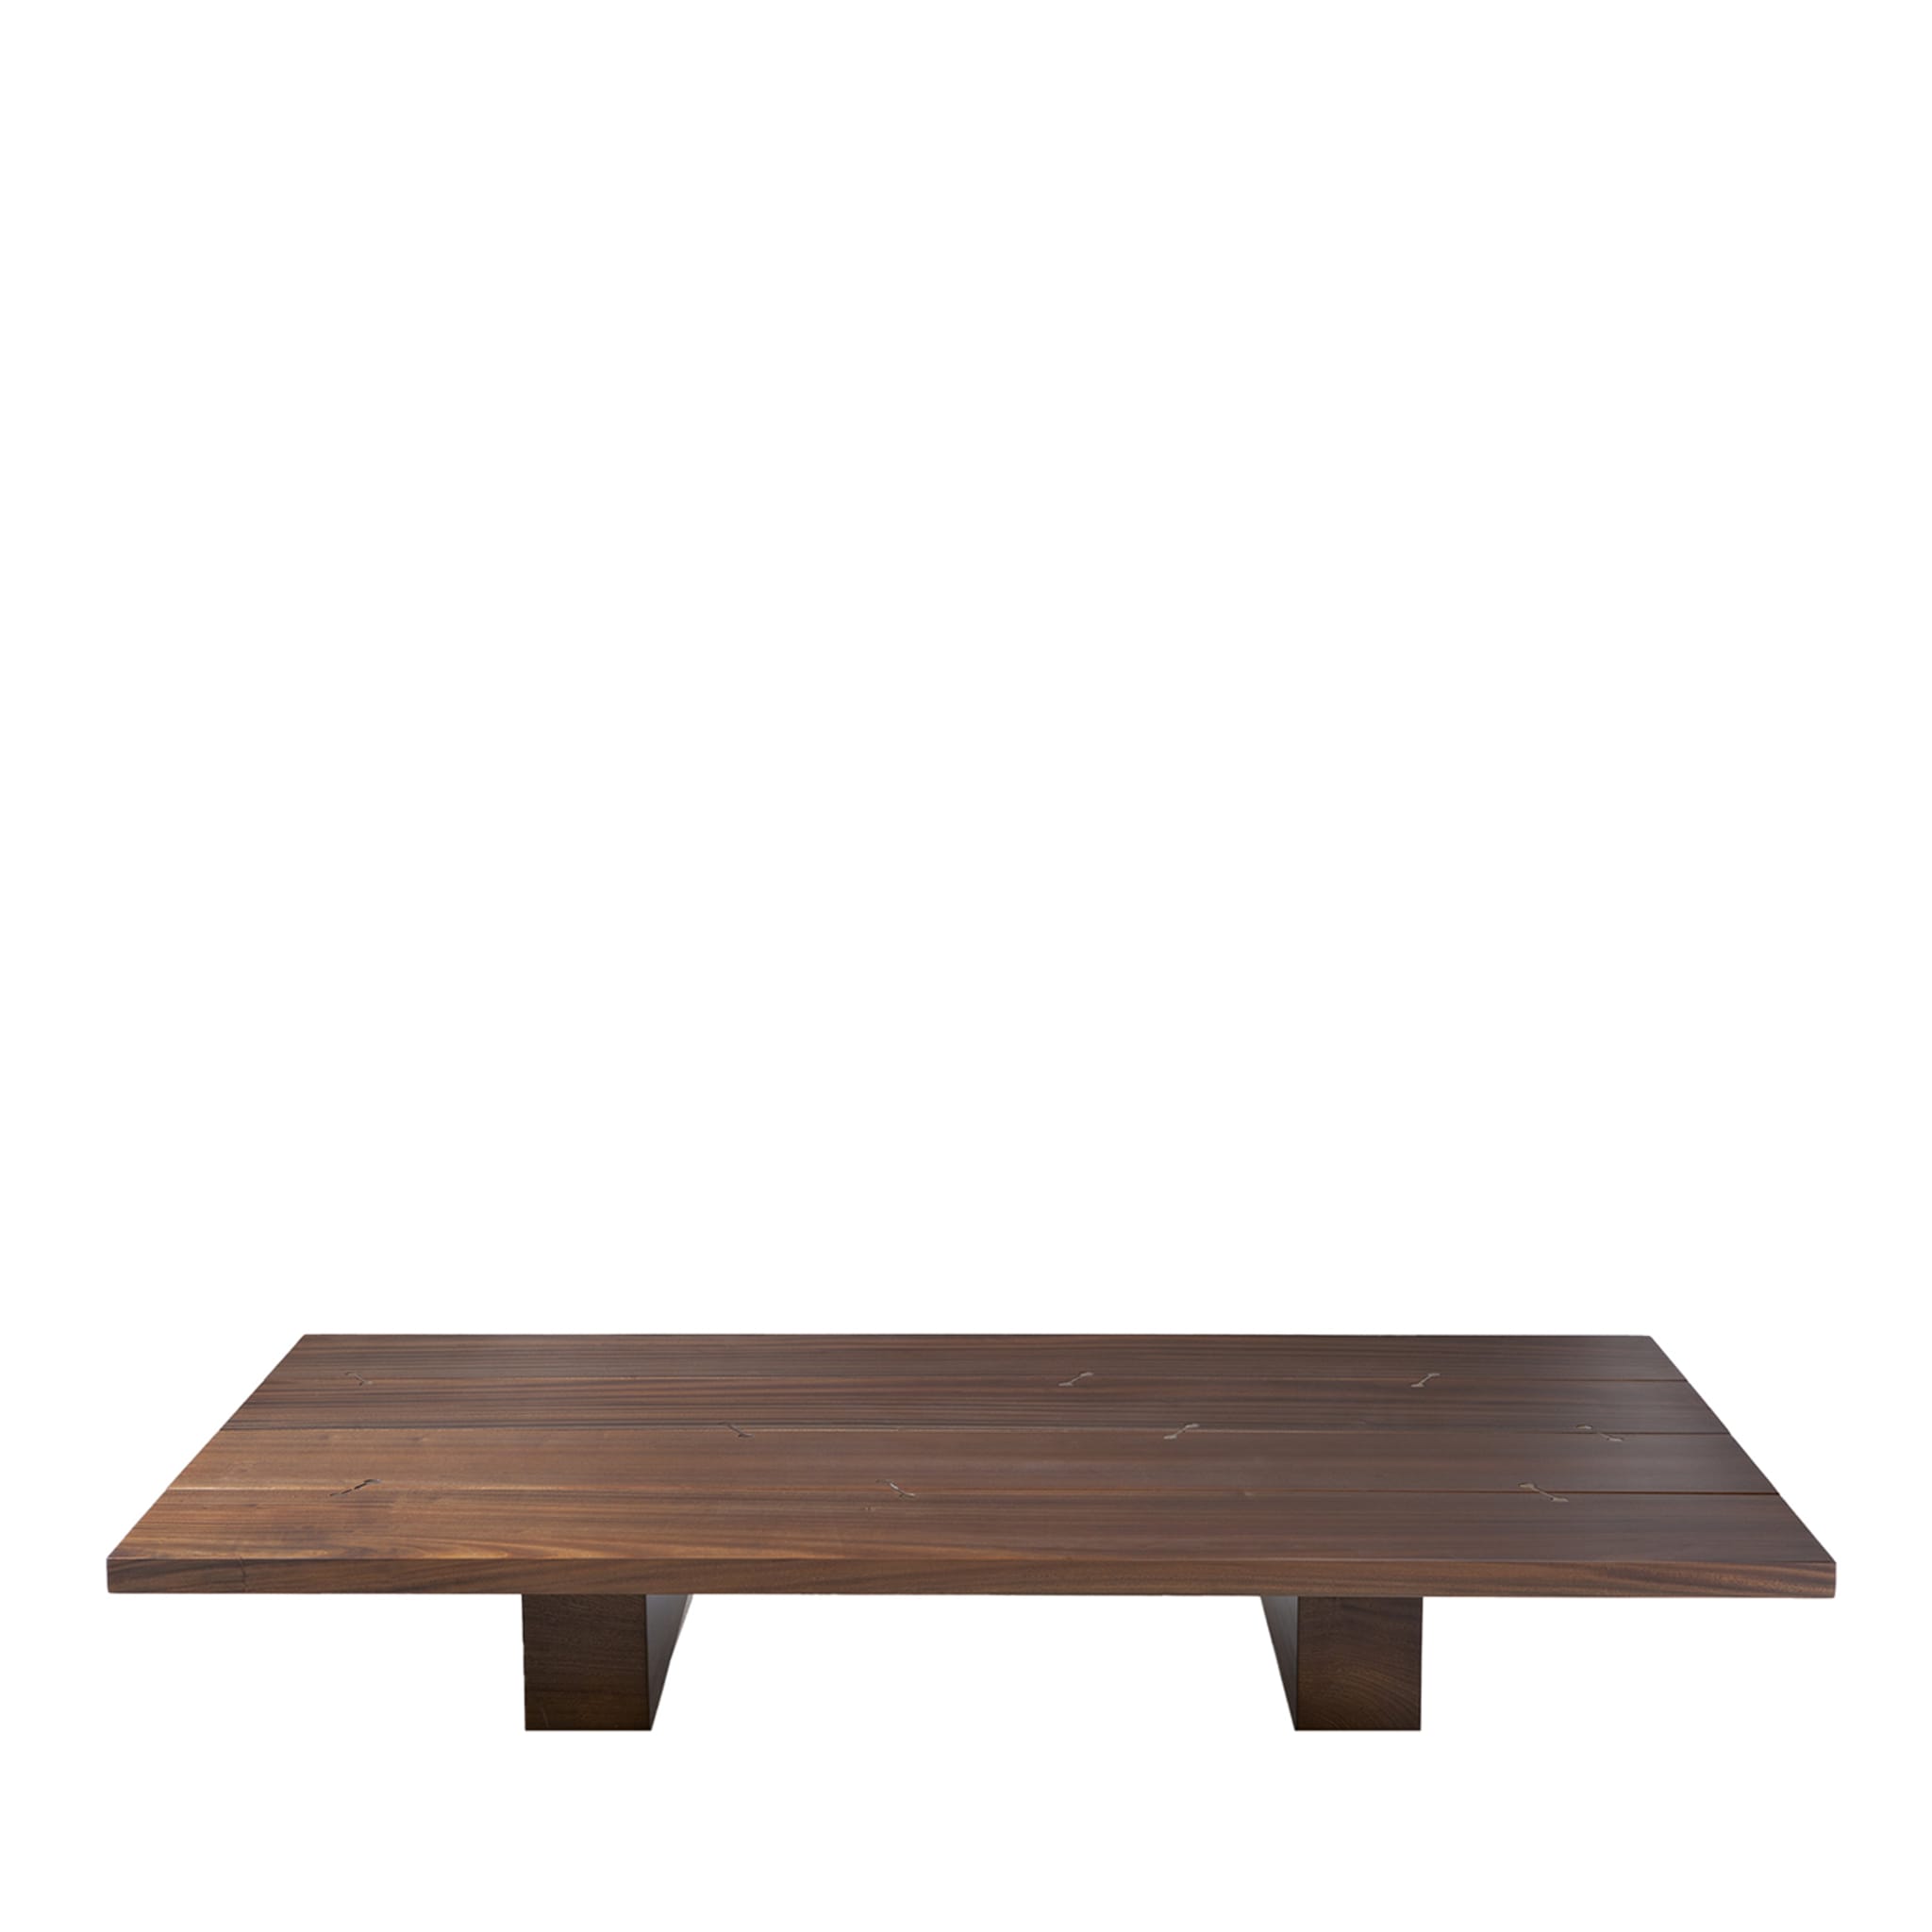 10th Joint Rectangular Coffee Table by Massimo Castagna - Main view